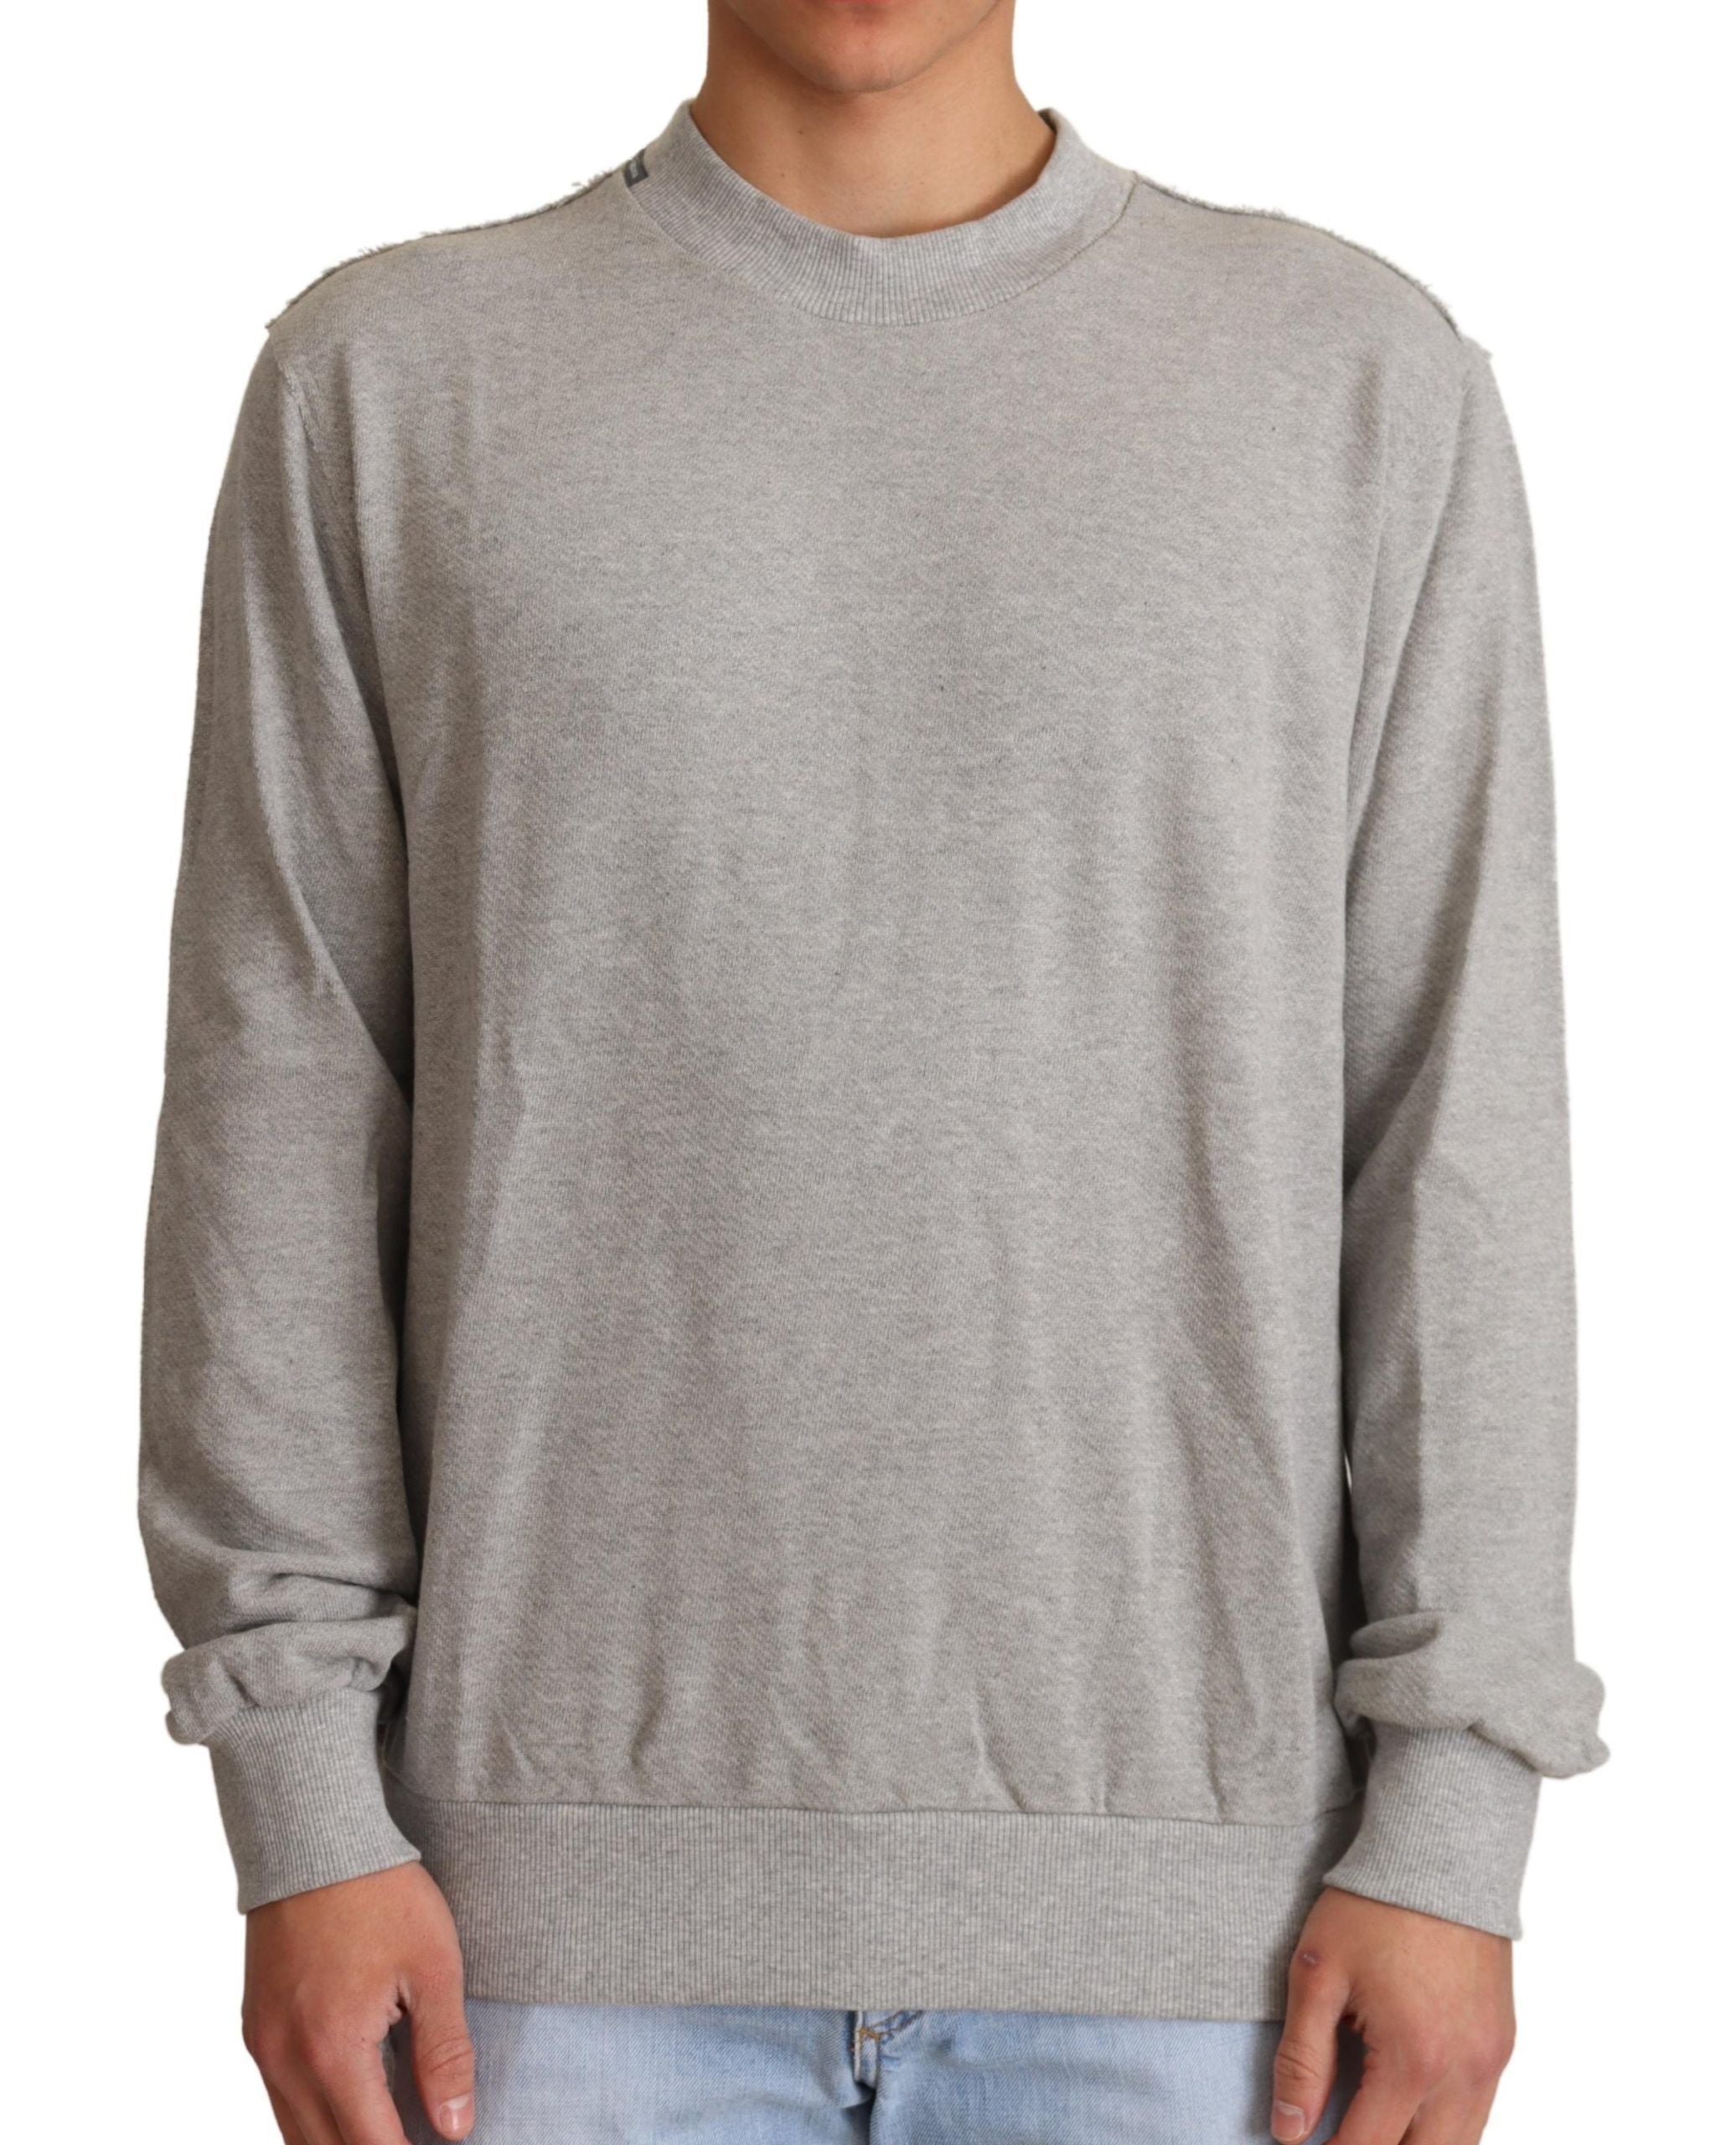 Sophisticated Gray Crewneck Sweater